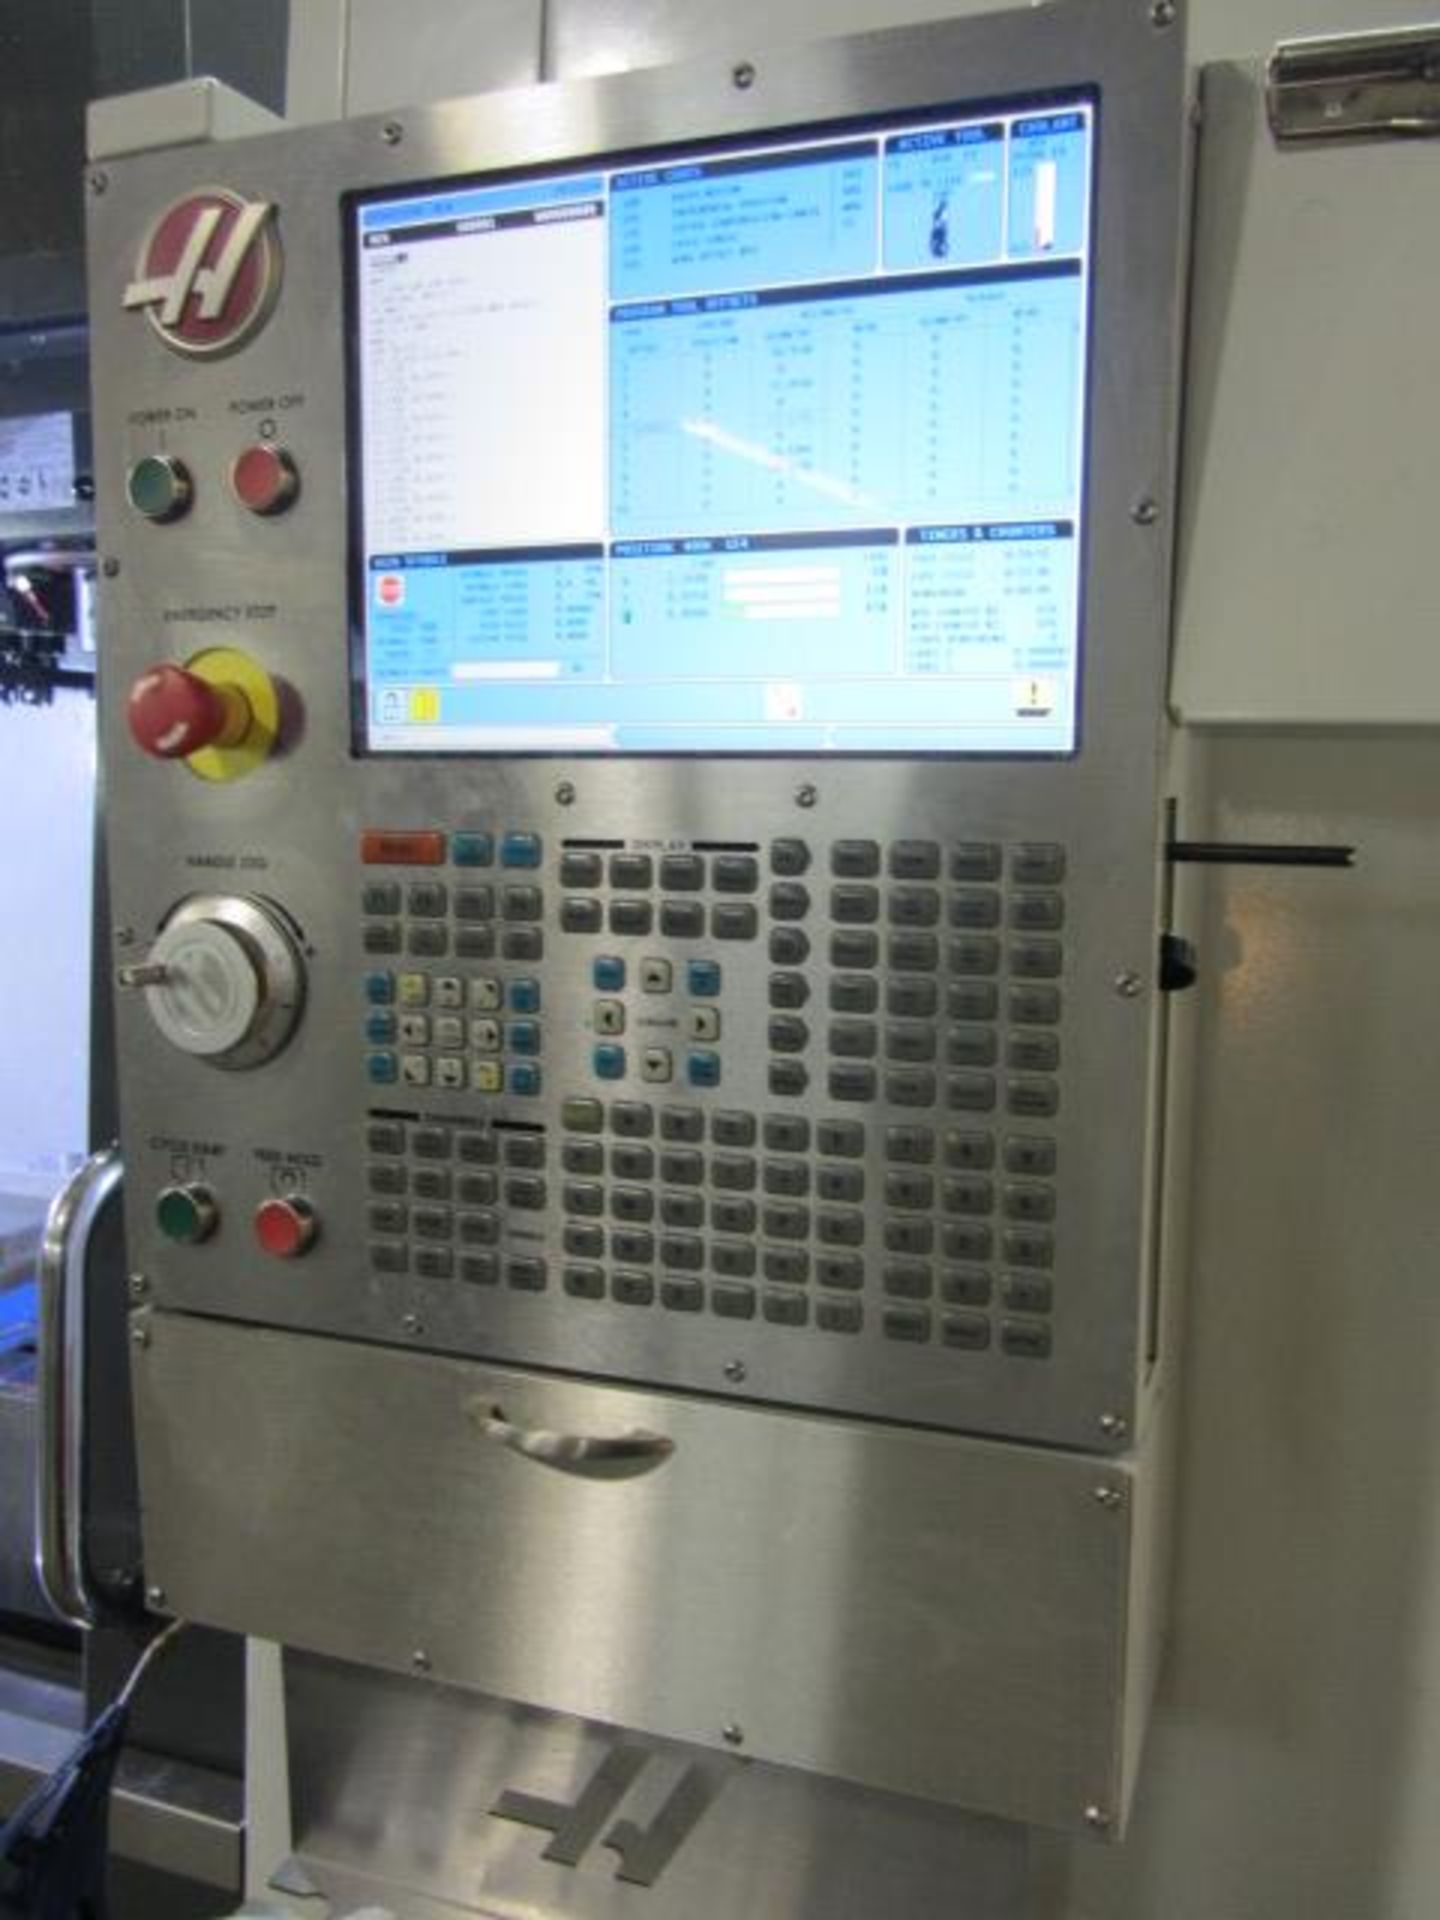 Haas VF-4 CNC Vertical Machining Center with 52'' x 20'' Table, #40 Taper Spindle Speeds to 8100 - Image 5 of 8